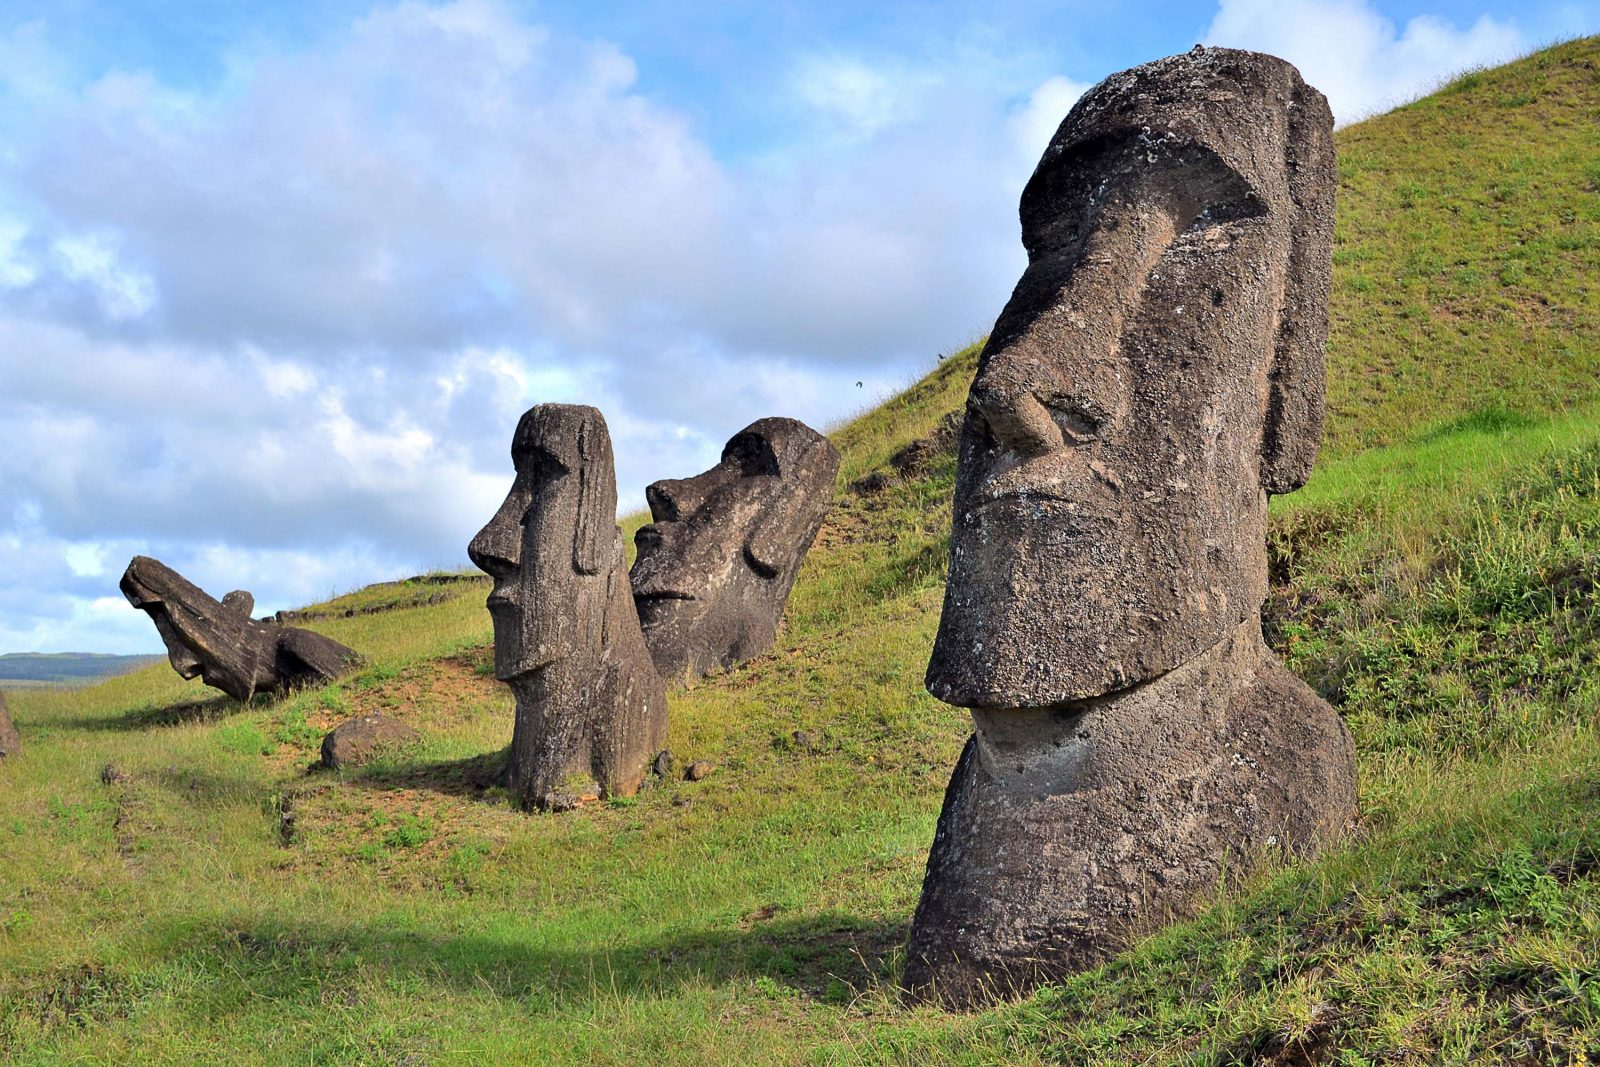 C In Geography Quiz Easter Island Moai statues, Chile